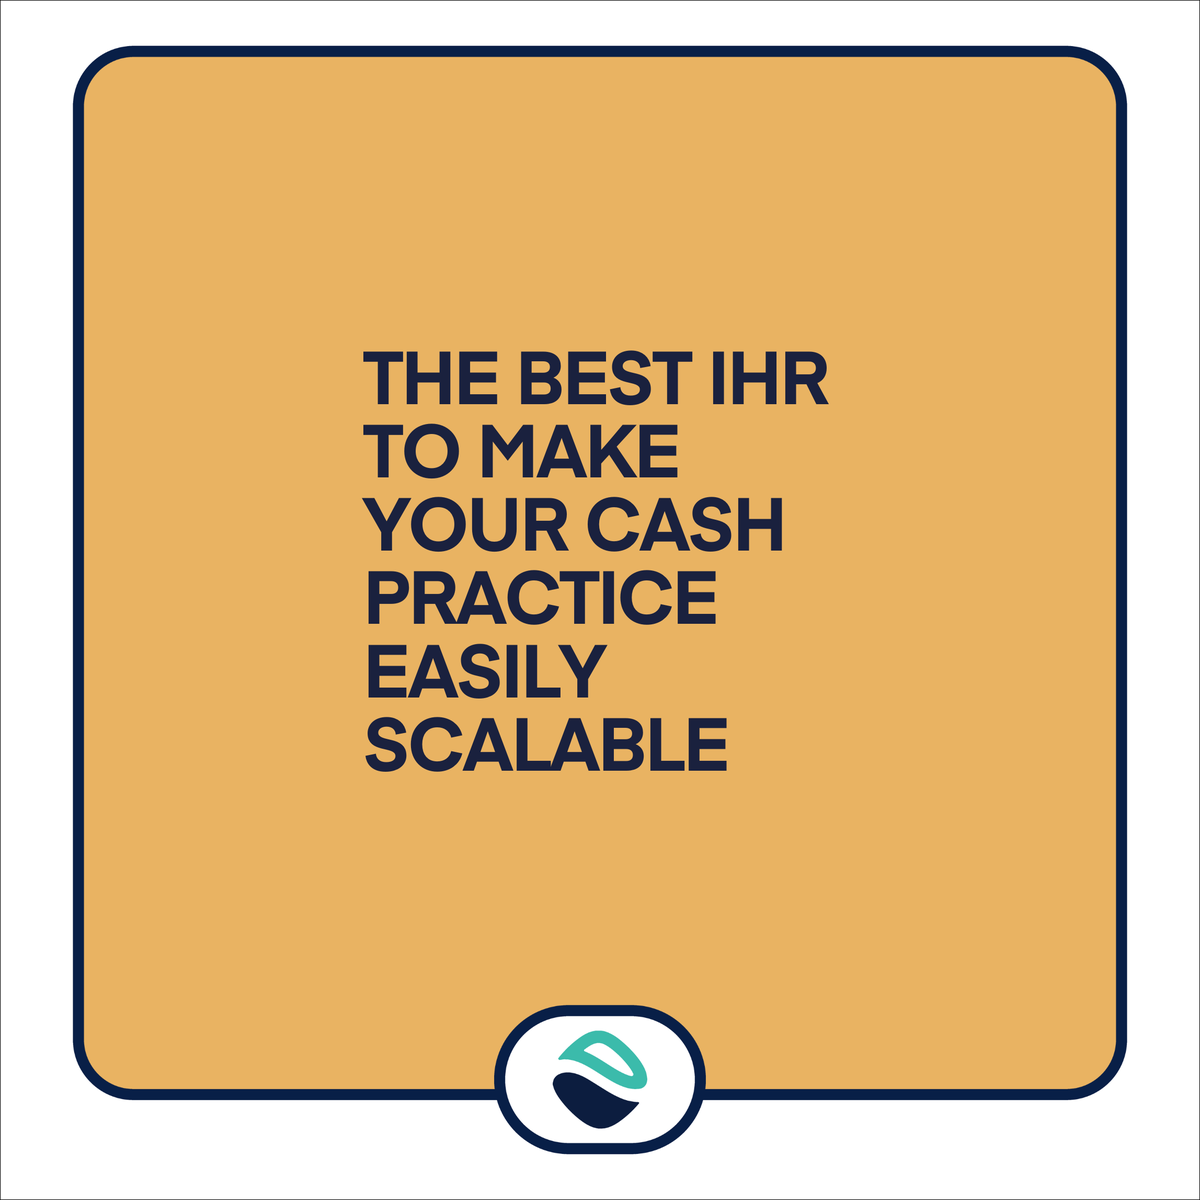 Unlock the most streamlined #clinicalworkflow w/ the IHR rescuing the avg #medicalpractice to thrive in today's competitive #healthcare landscape. Eva is the key to expanding your #cashpractice w/o the stress. 

Comment 'Show me' to tour #Eva!

#EMR #EHR #medicalcashpractice